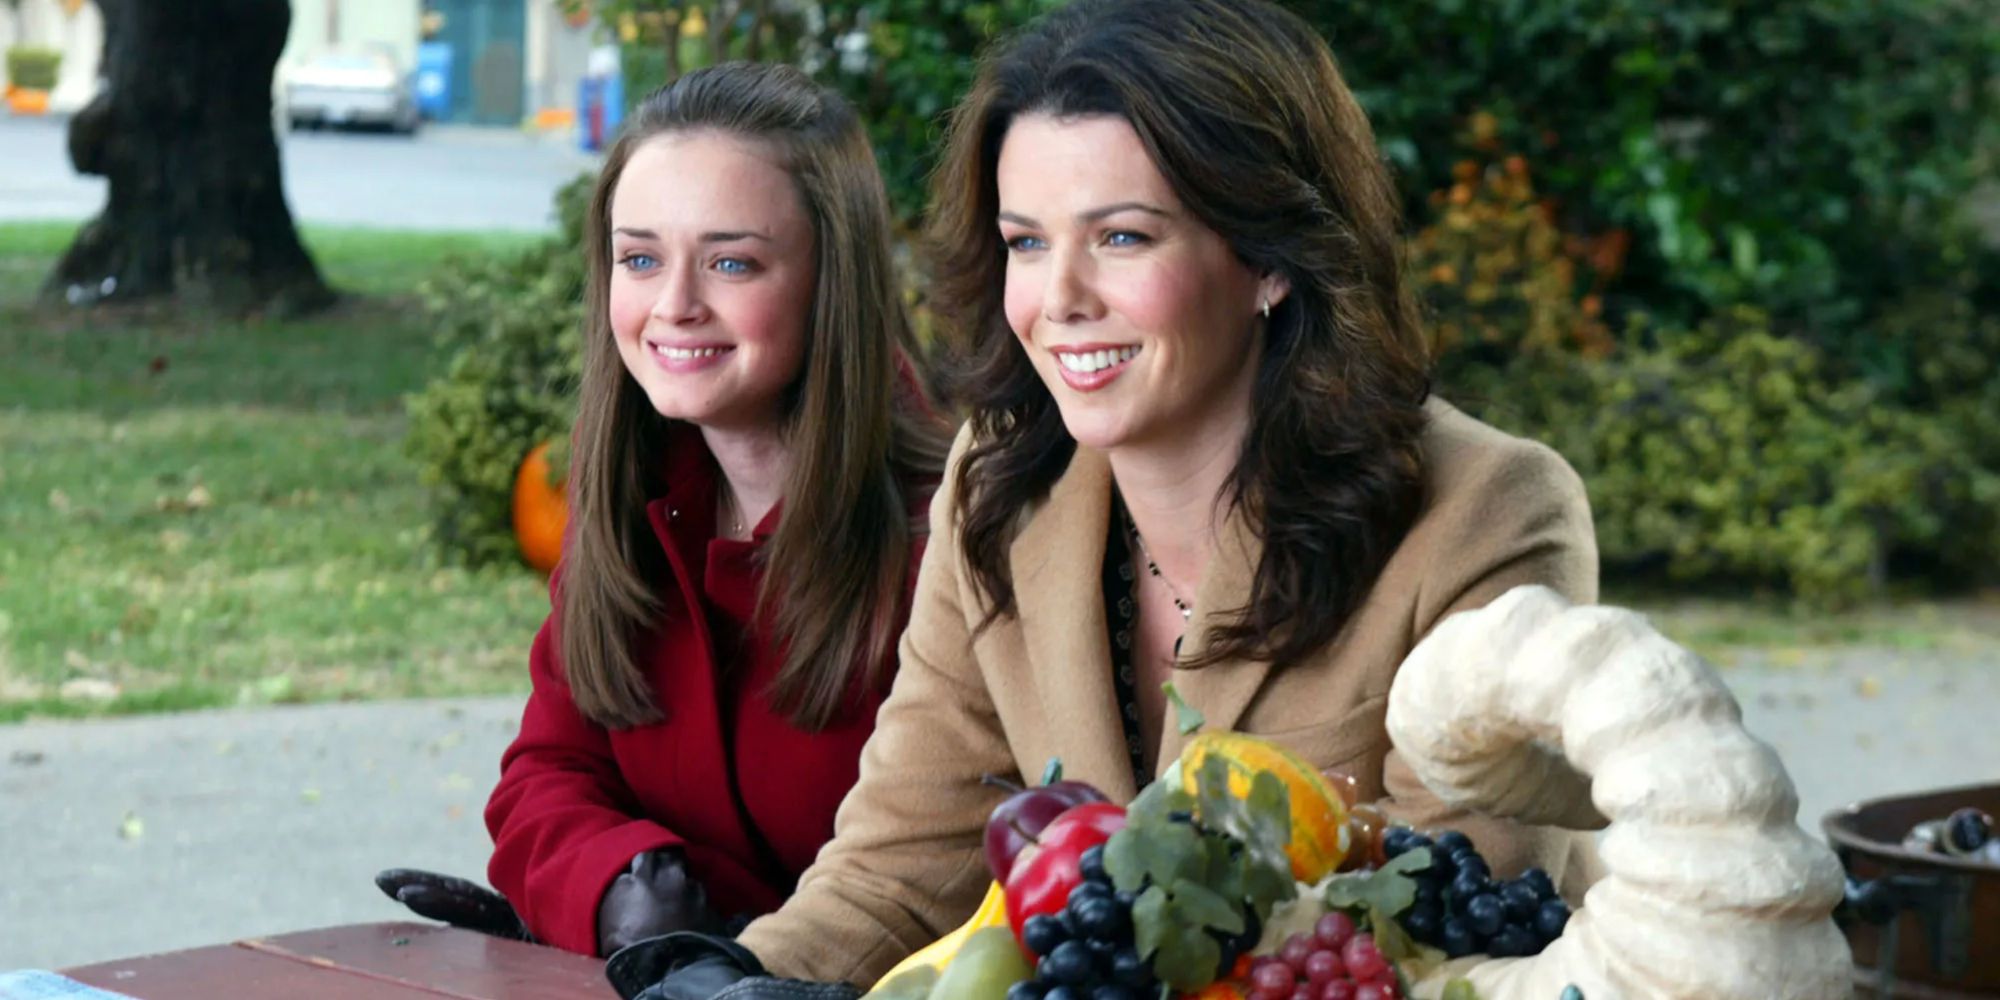 Lauren Graham and Alexis Bledel sitting at a picnic table smiling 